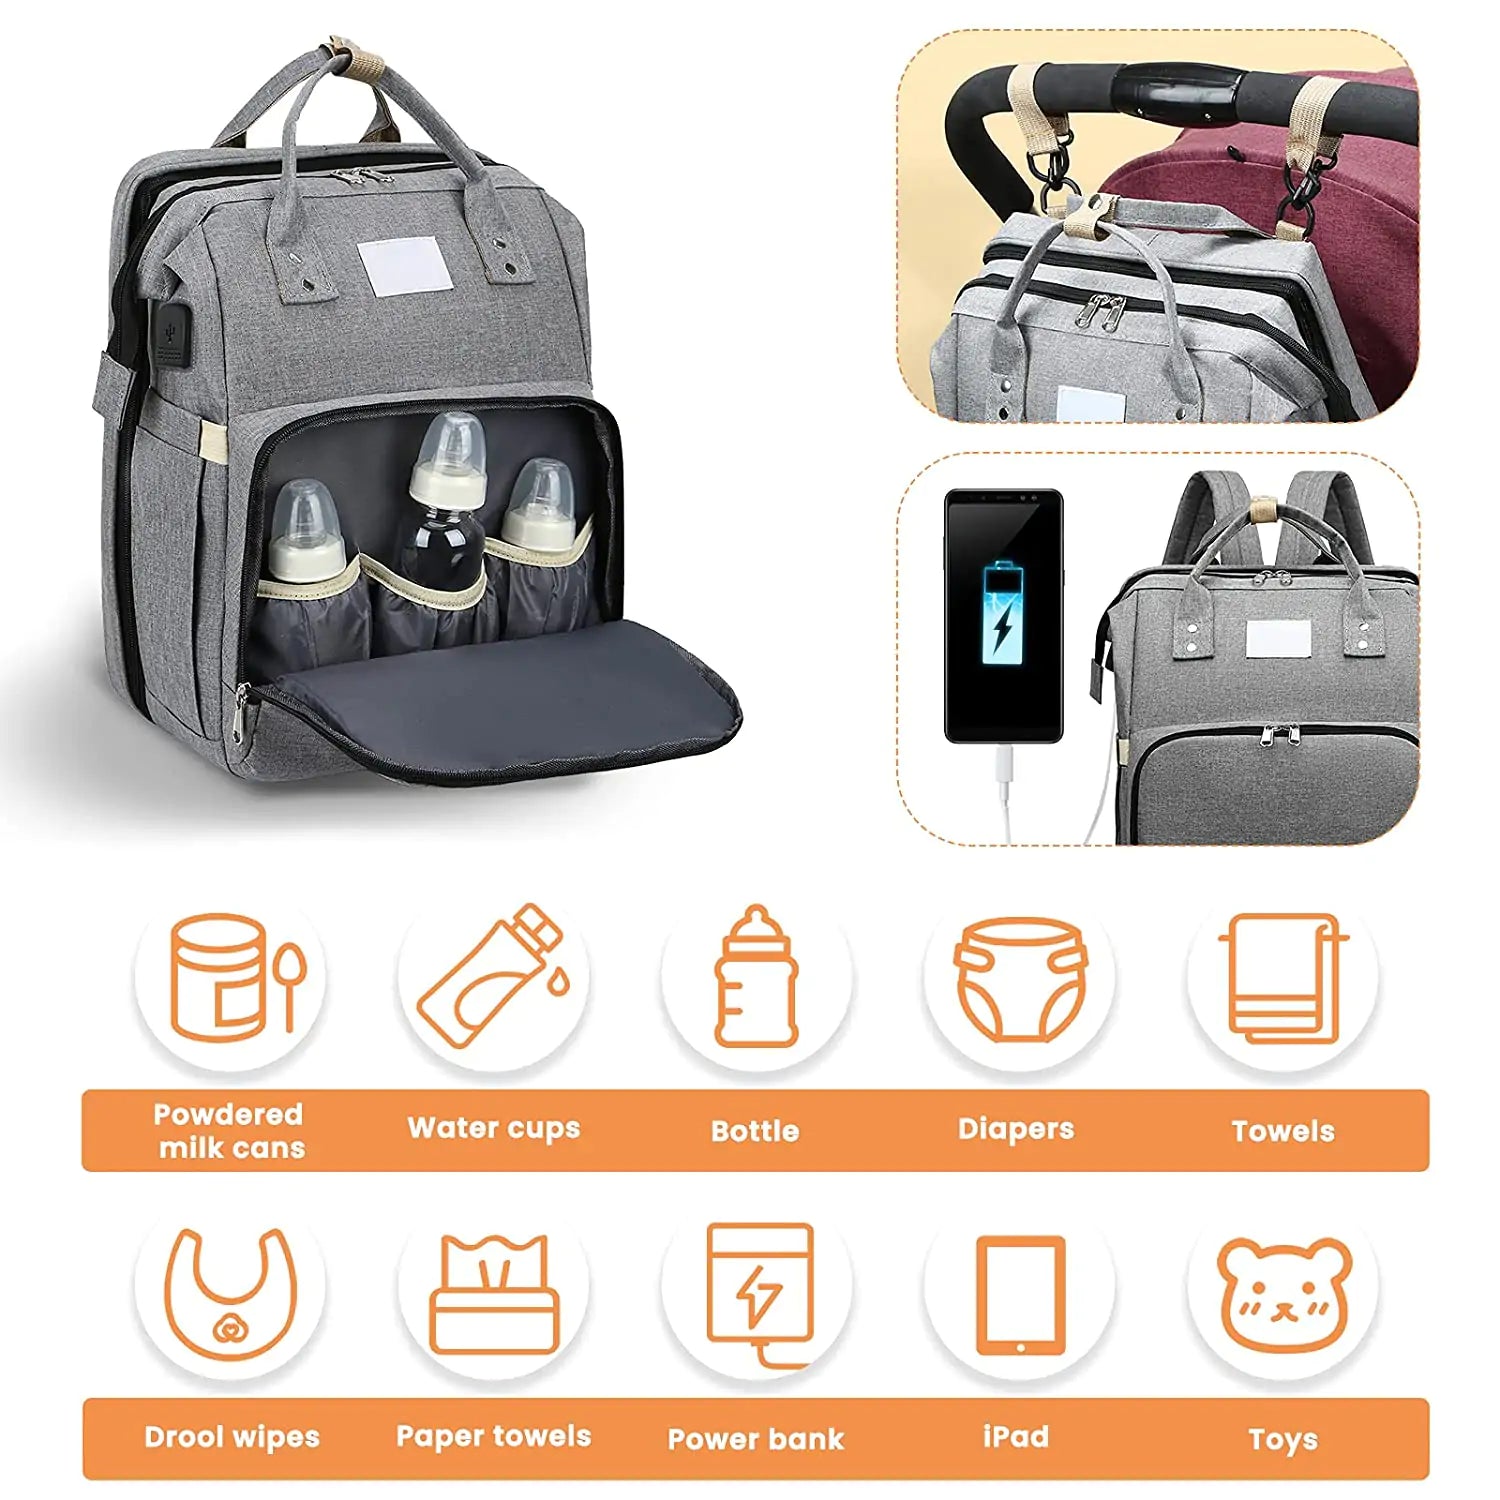 2 In 1 Portable Multifunctional Baby Bed Backpack